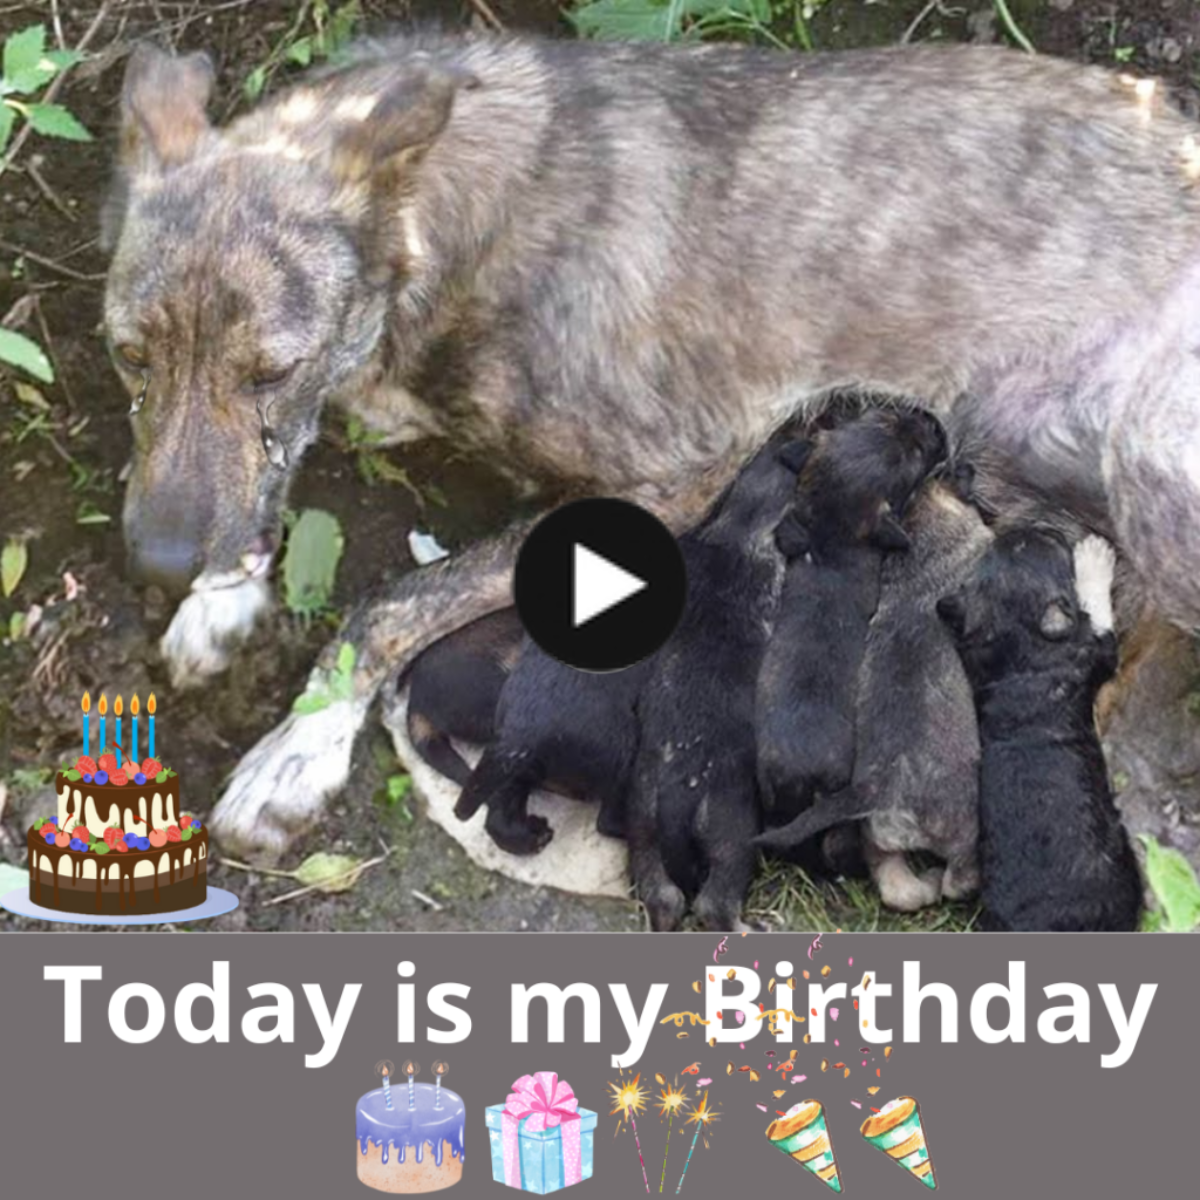 Mother’s sacrifice: Heartbreaking birthday of a brave mother dog, trying everything to keep her children healthy, hoping that many people will love and help her cubs.